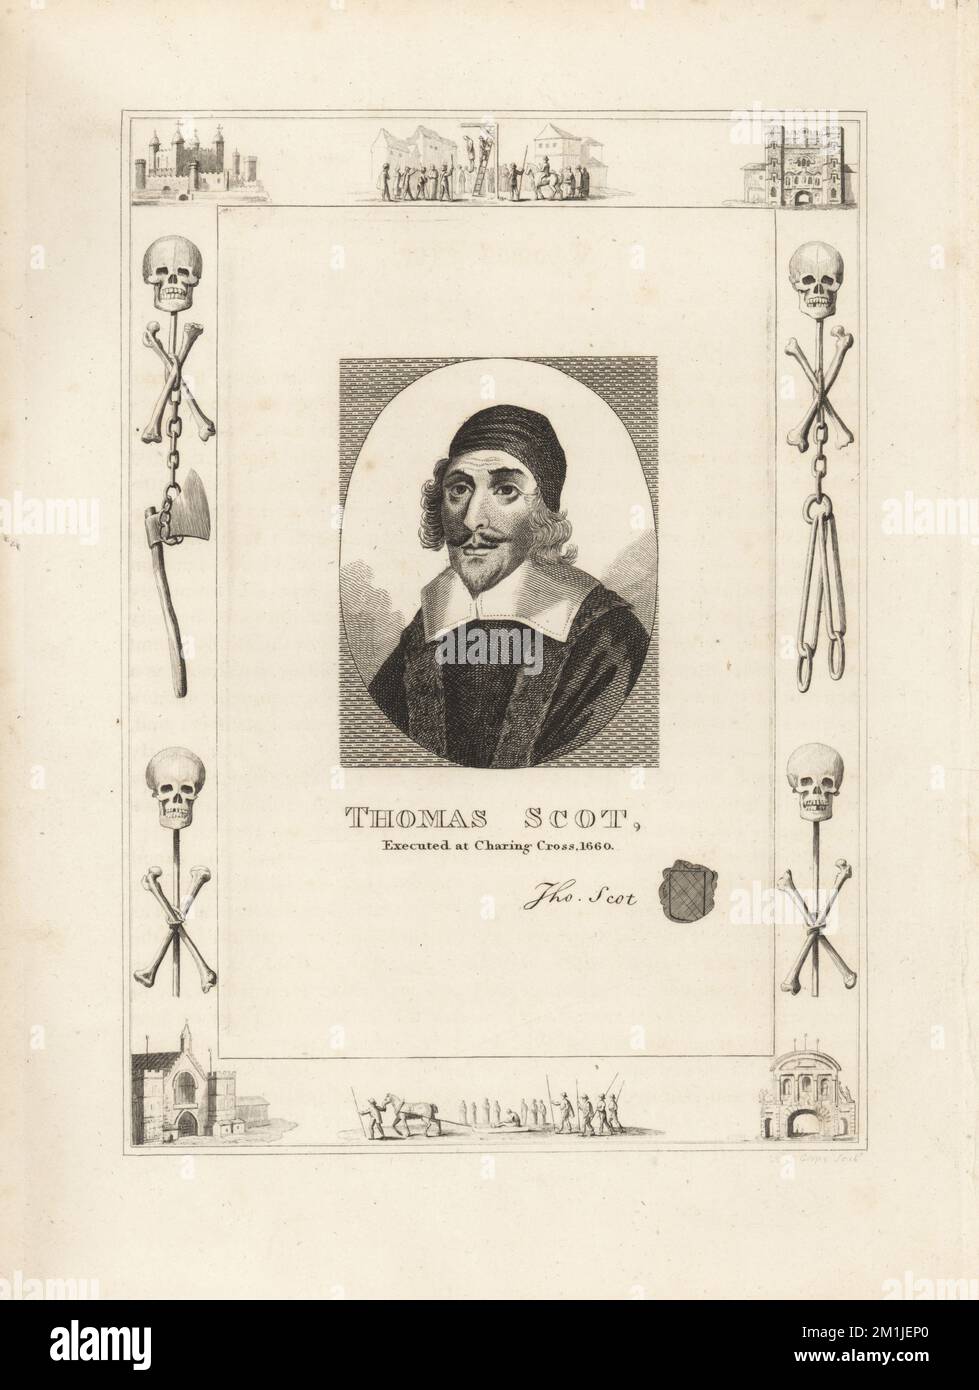 Thomas Scot, executed at Charing Cross in 1660. English politician and regicide, tried and hanged, drawn and quartered. With his autograph and seal. Within a frame decorated with vignettes of skull and cross bones, chains and executioner’s axe, a man hanging from a gibbet at Tyburn, a condemned man on a sled, the Tower of London, Newgate Prison. Copperplate engraving by Robert Cooper from James Caulfield’s The High Court of Justice, London, 1820. Stock Photo